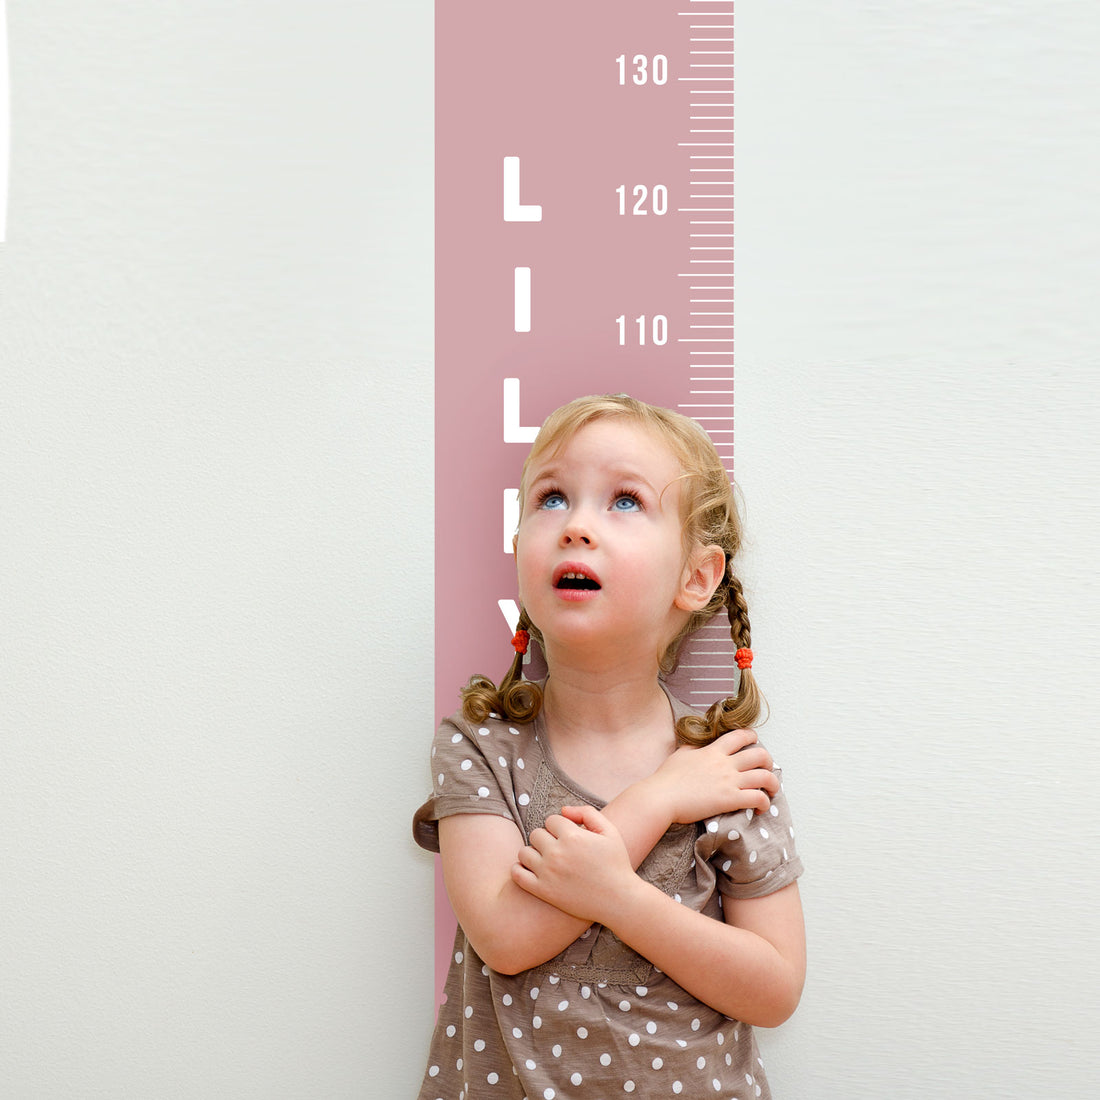 Removable Wall Decal Height Chart